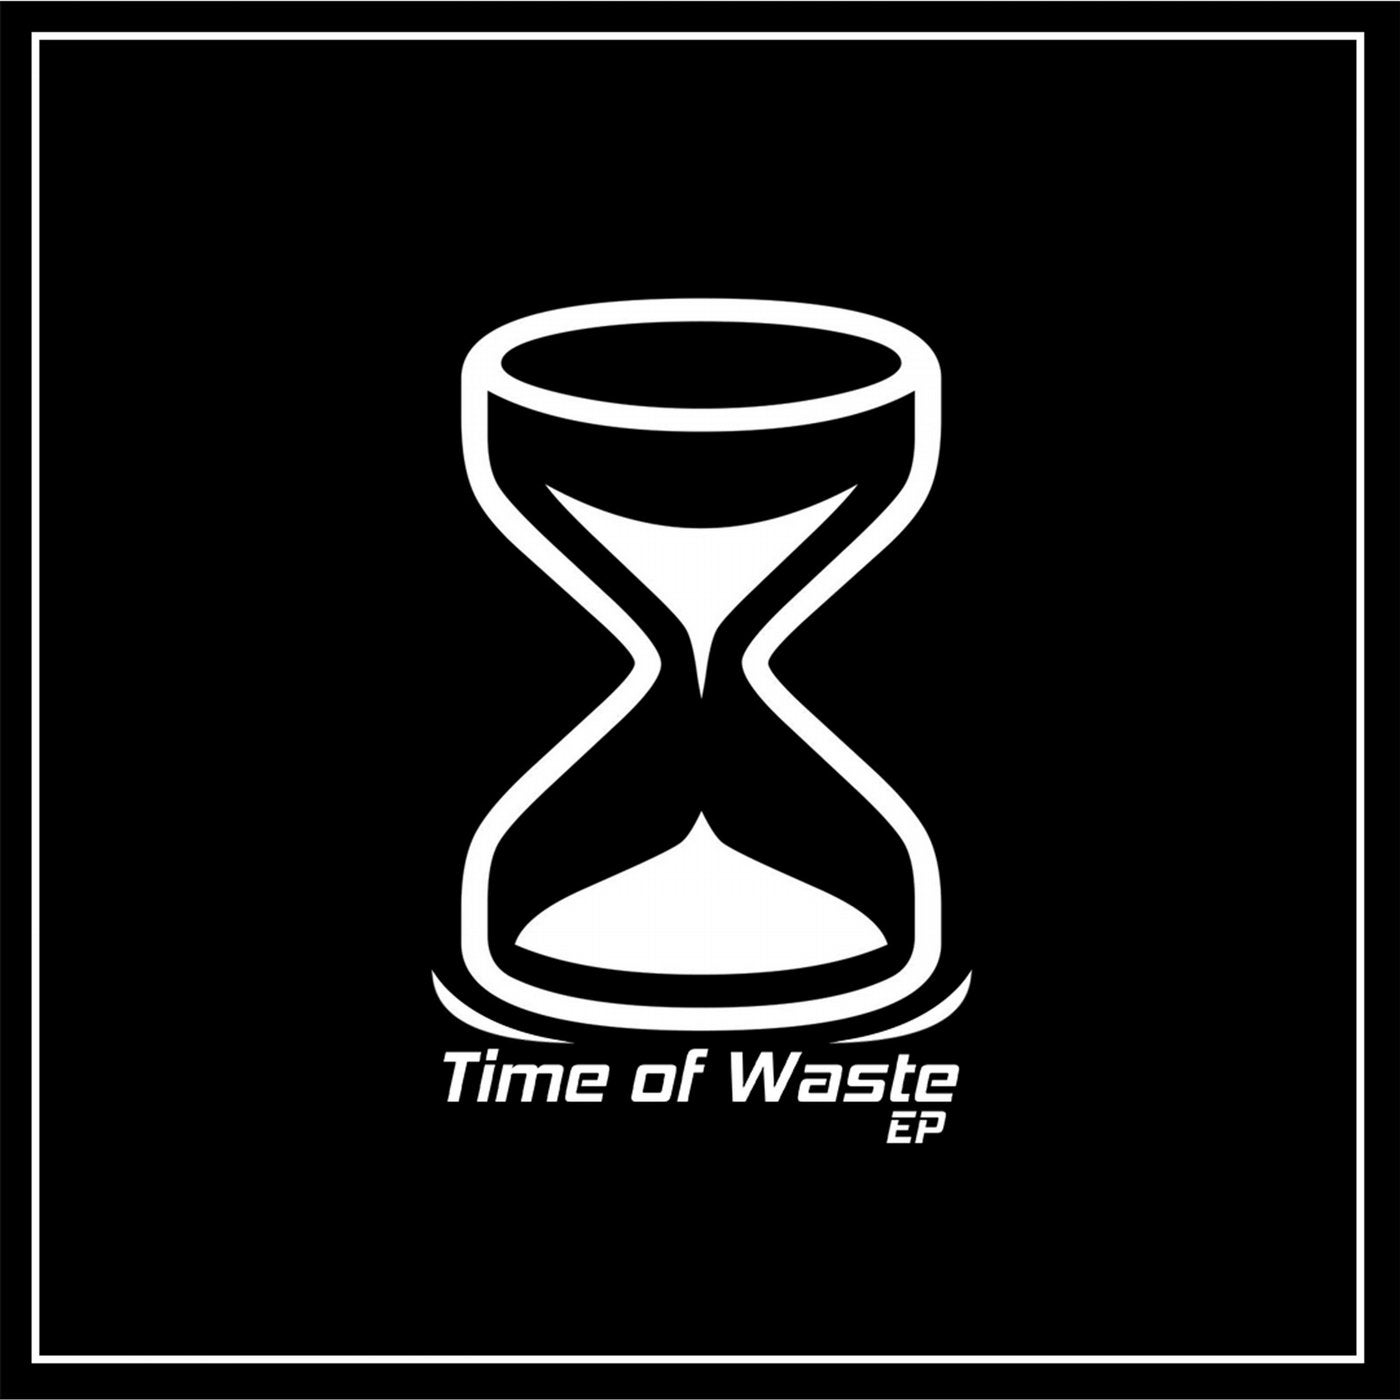 Time of Waste EP